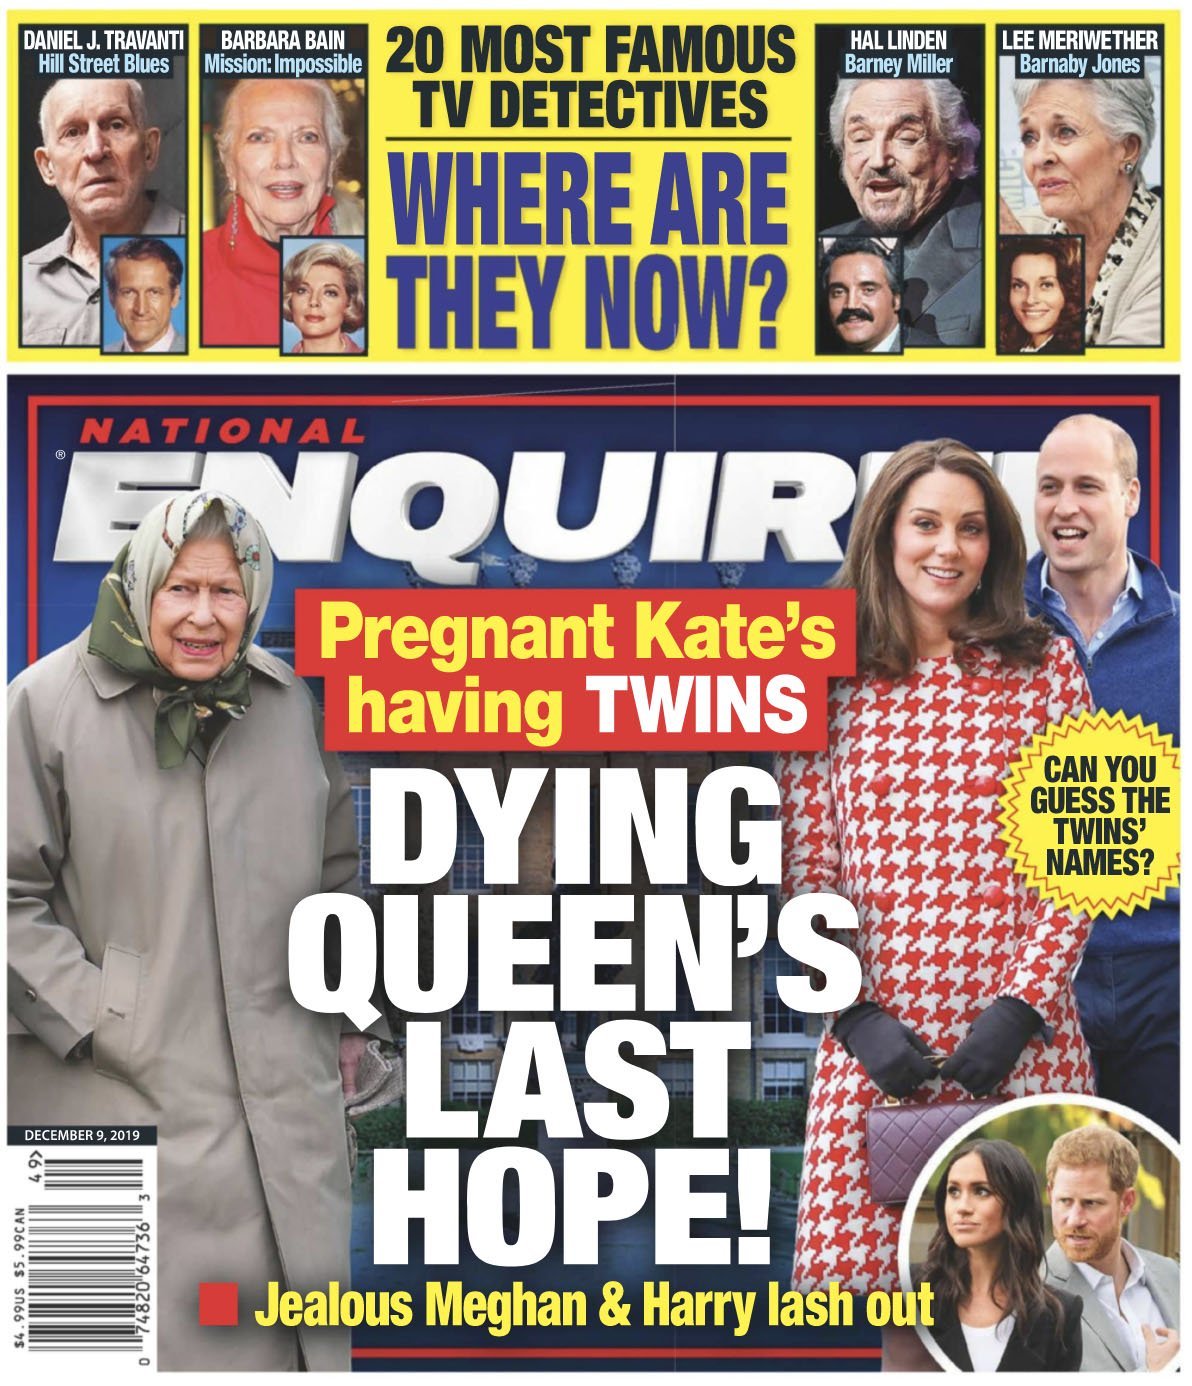 Queen Elizabeth on the cover of the National Enquirer in December 2019.